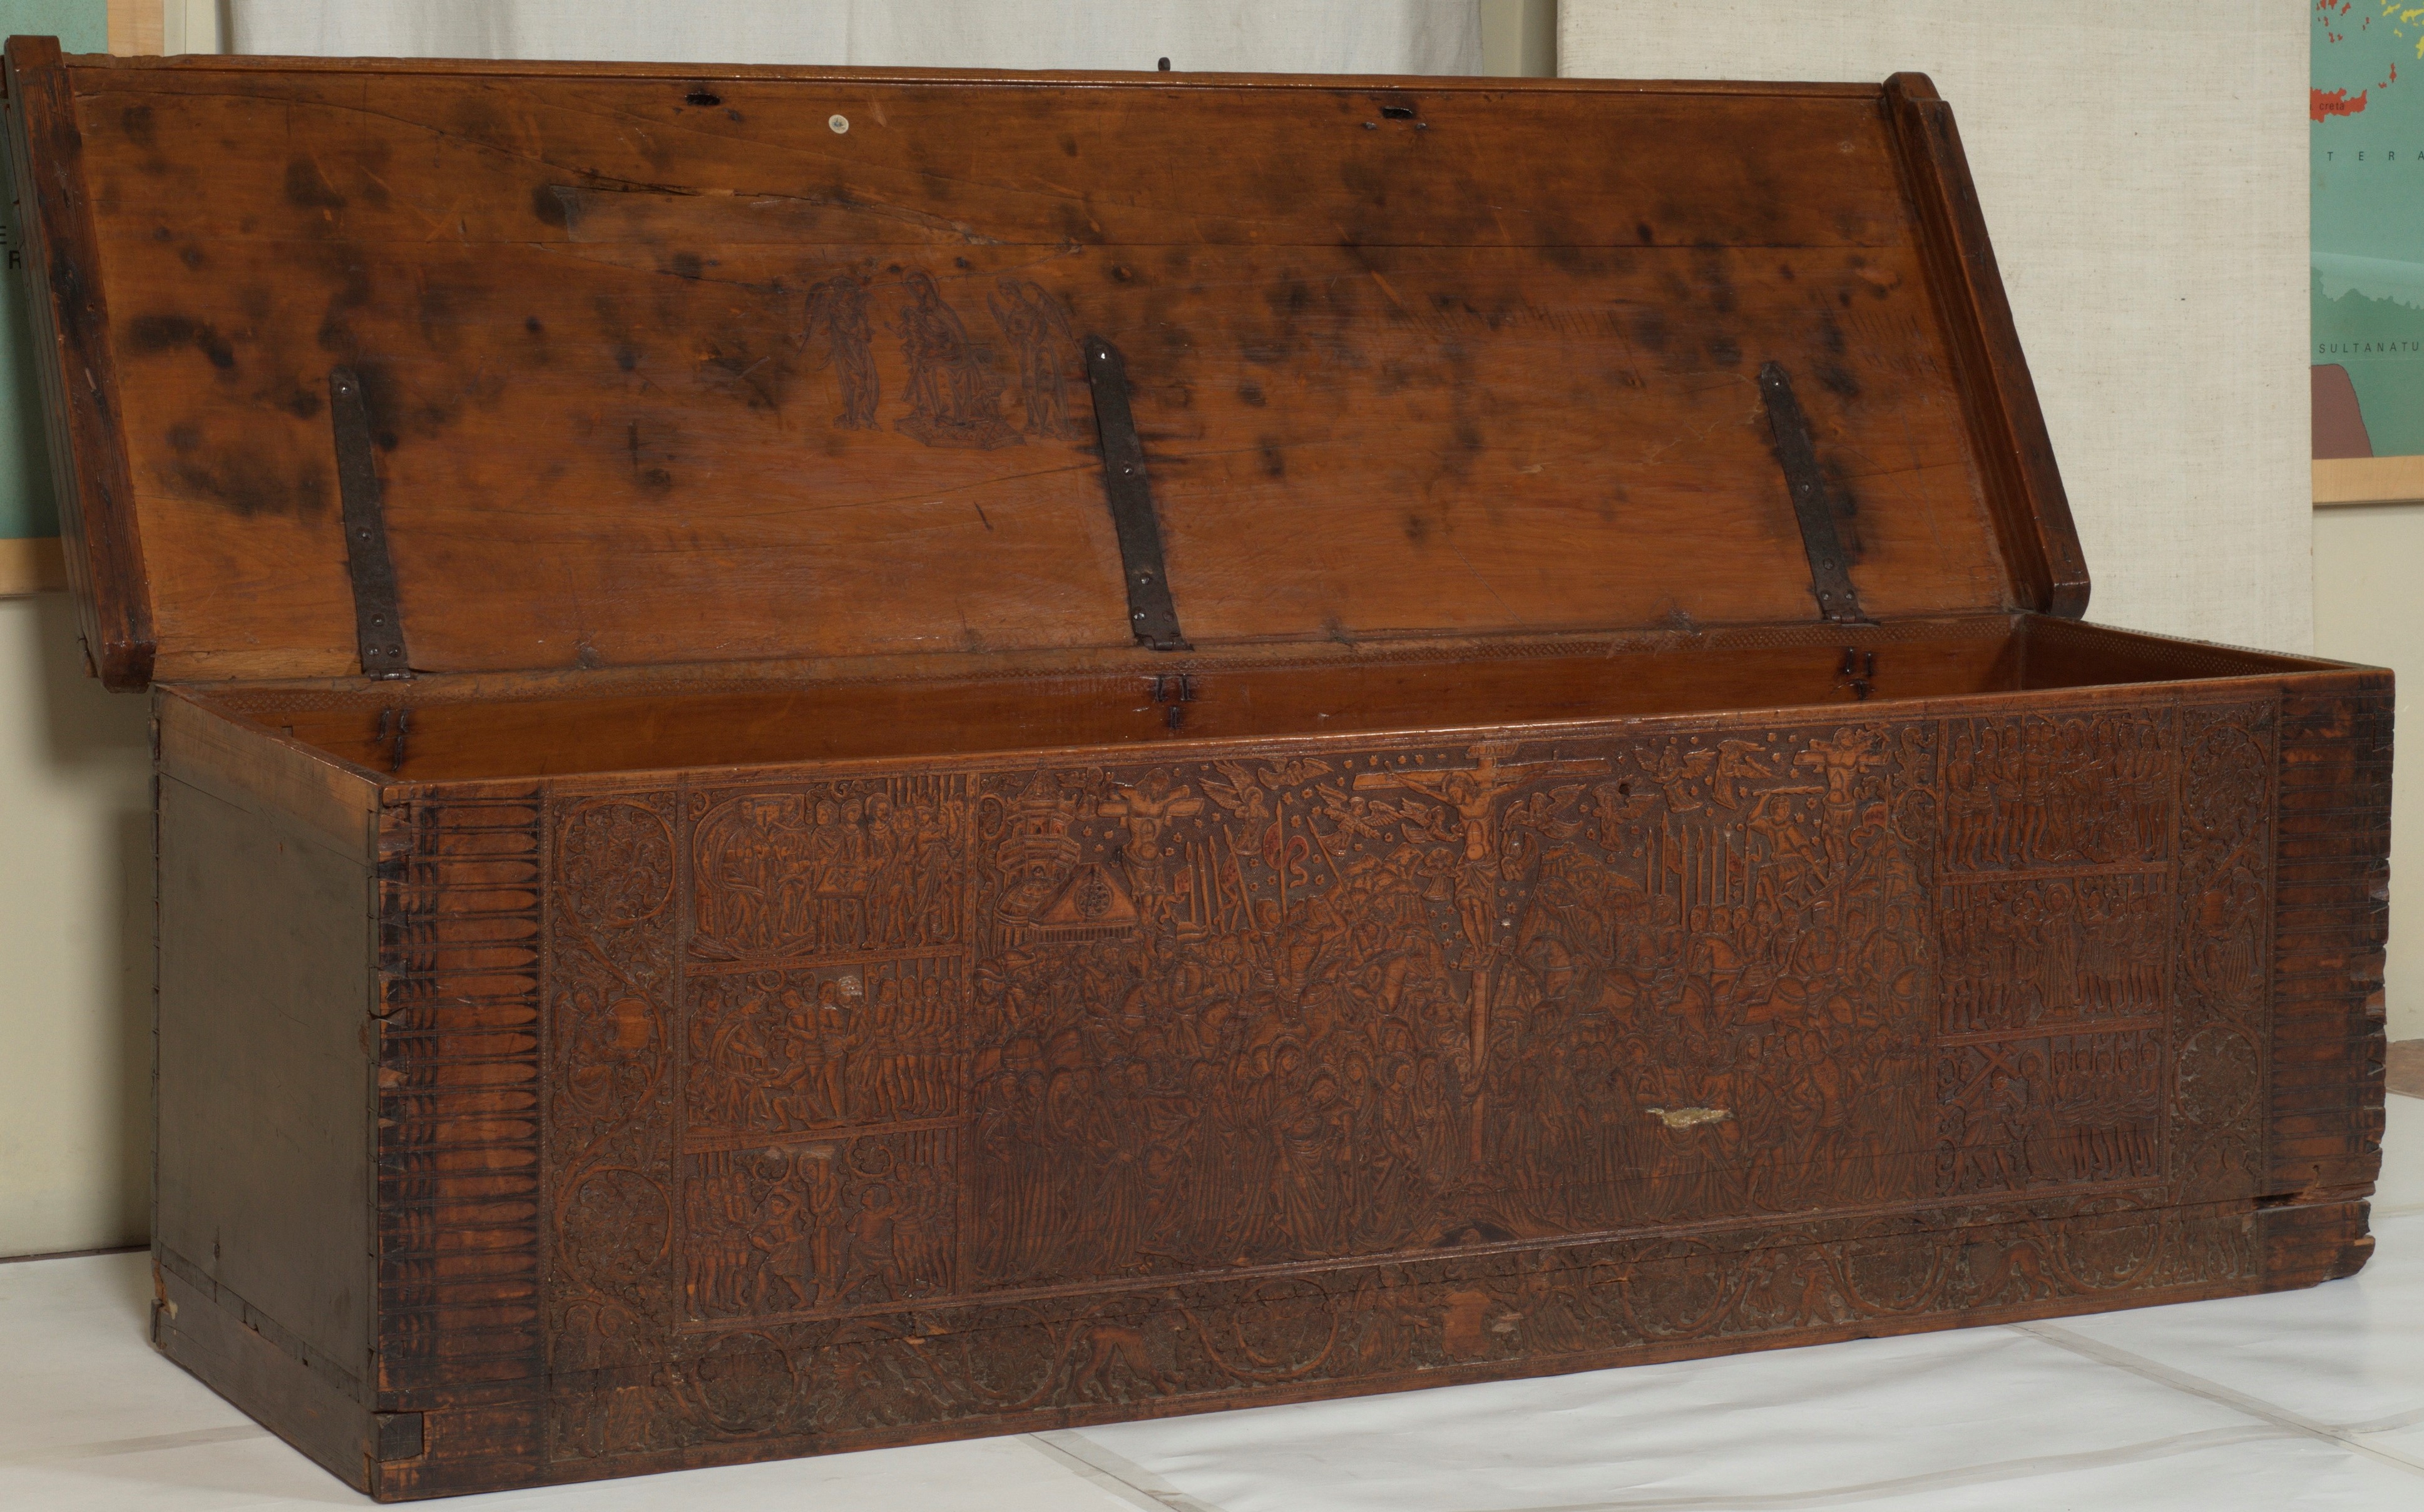 The Wooden Sacristy Chest of Putna Monastery